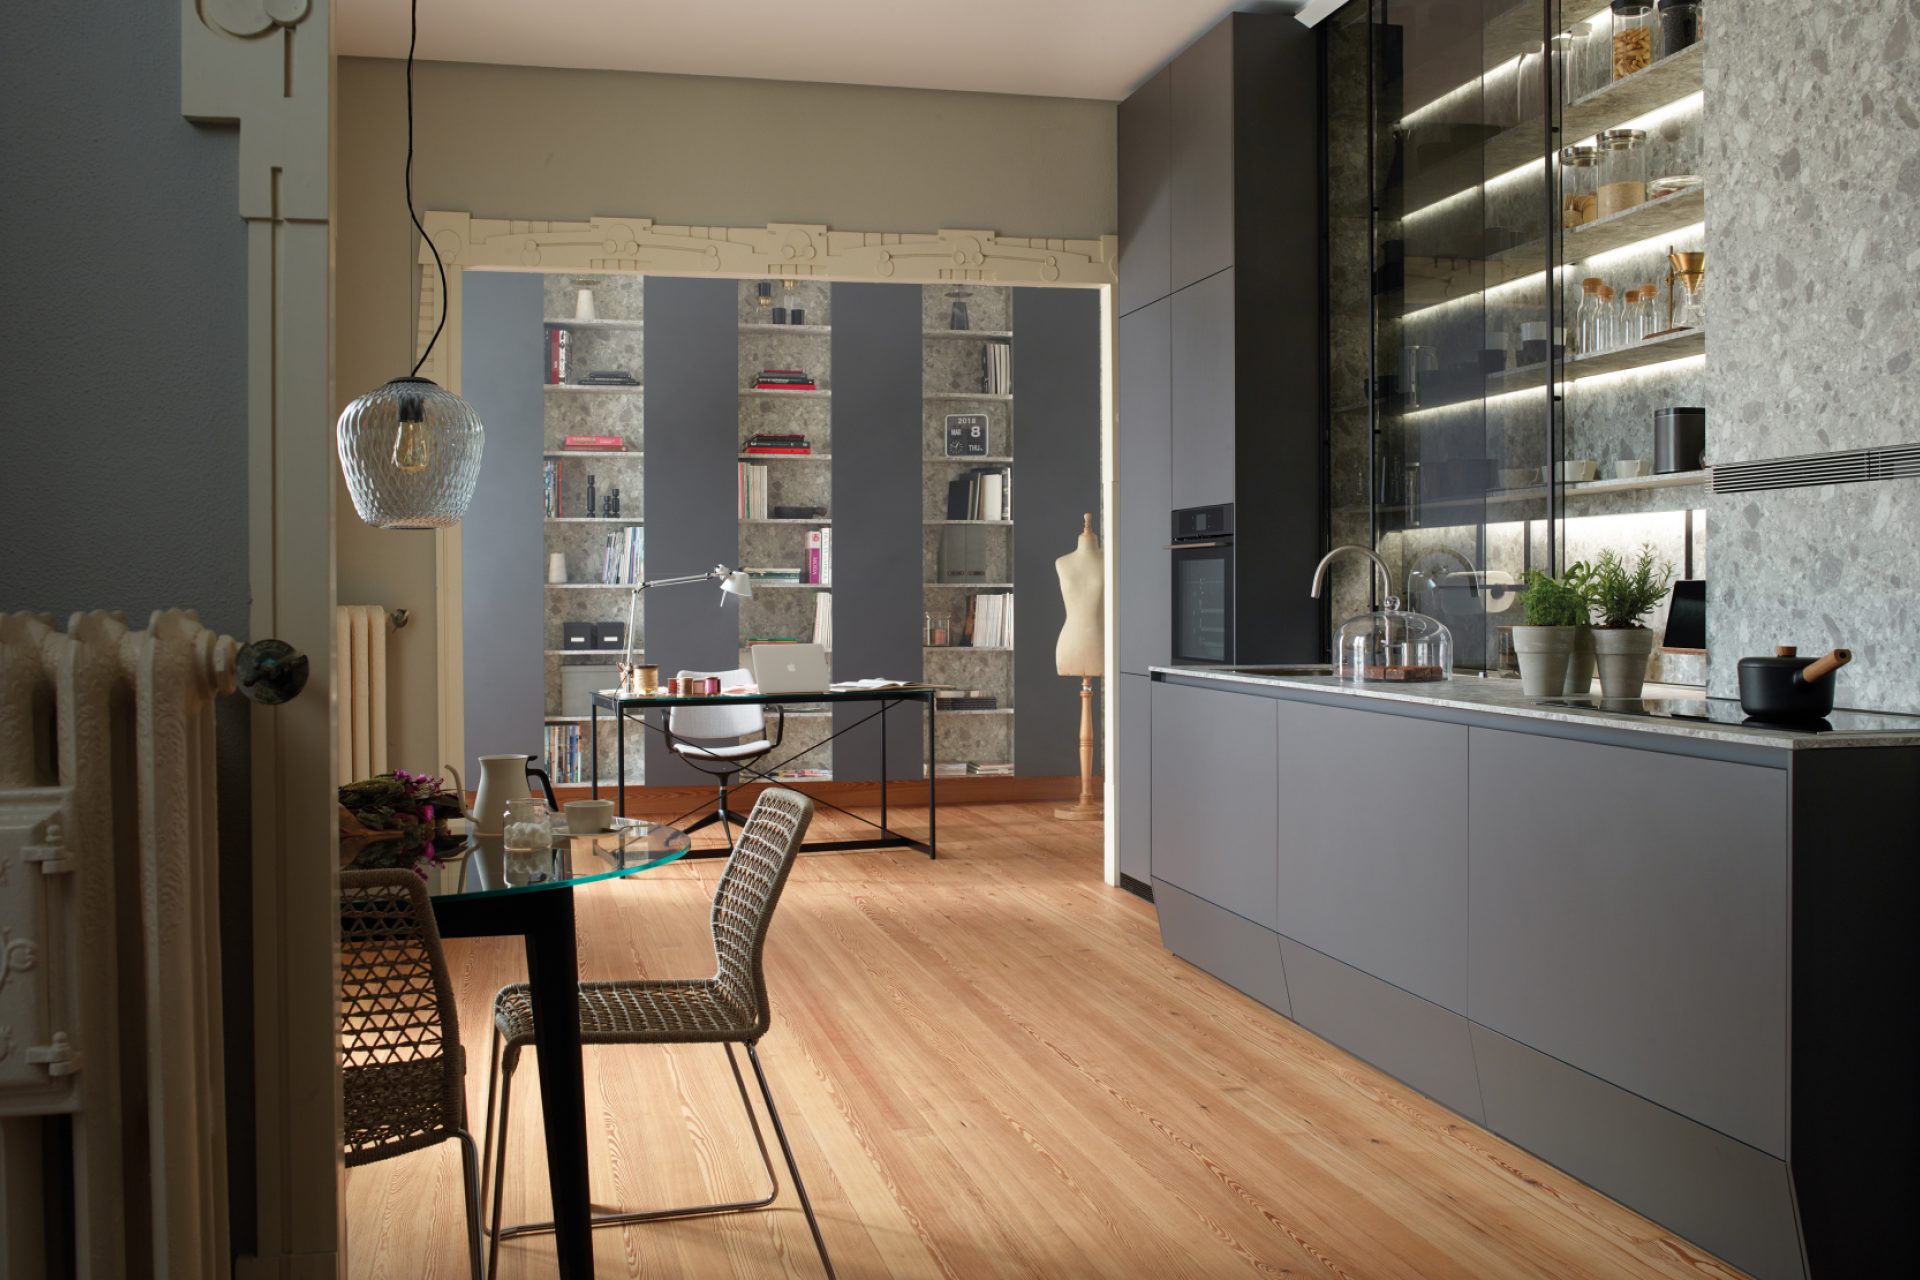 Grey linear kitchen with wall modules, shelves and base modules, open towards the living area